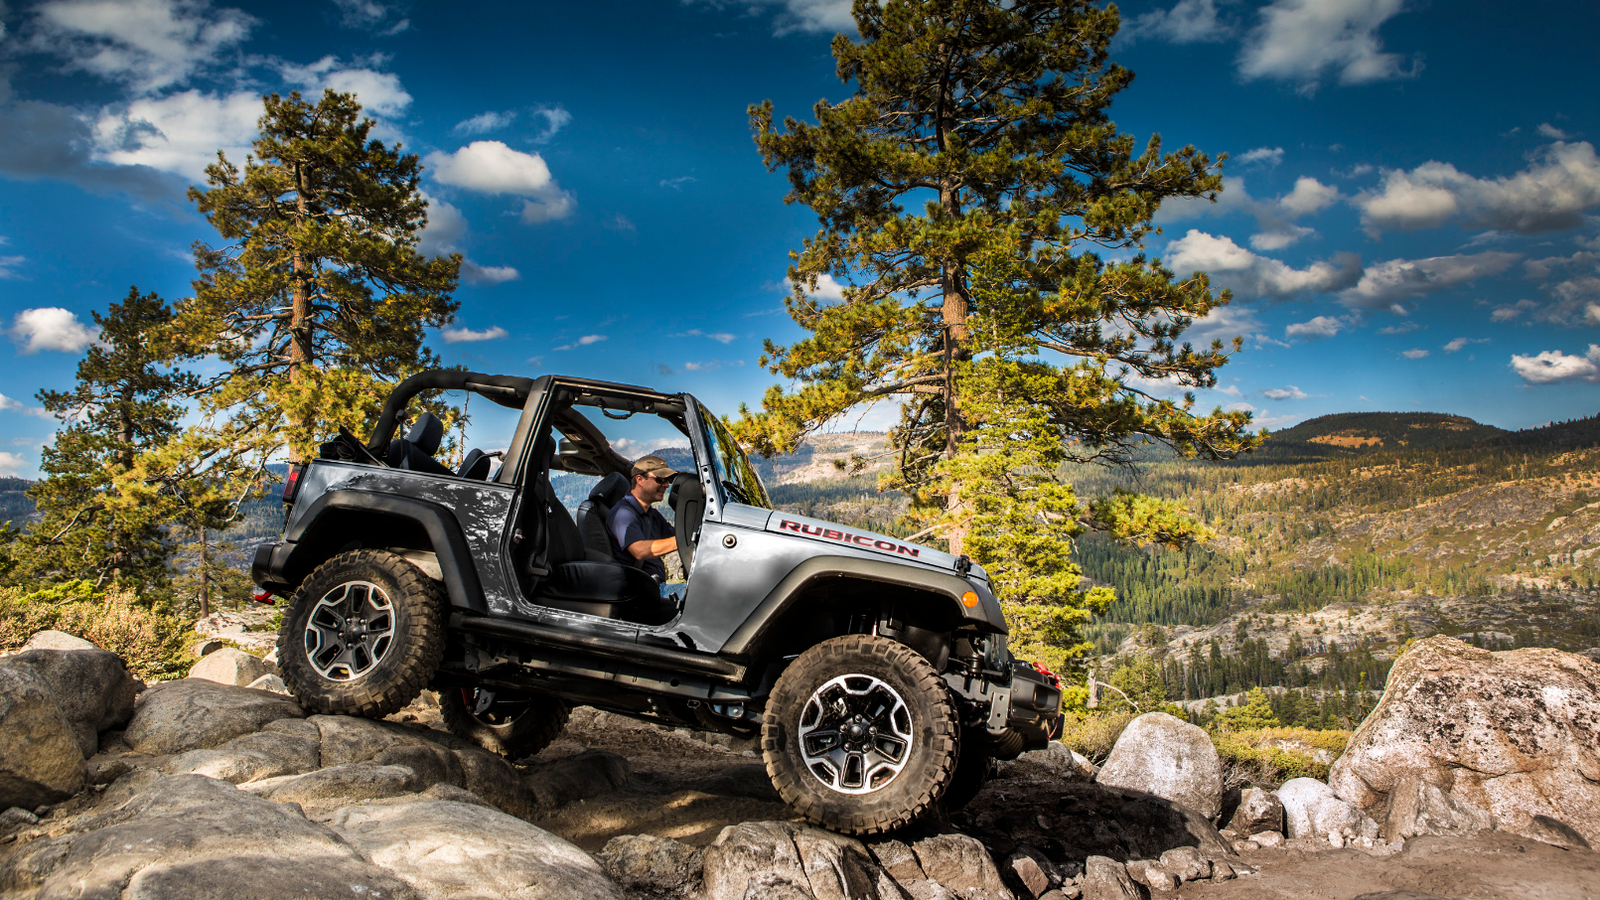 What are some technical specifications to be aware of if you own a Jeep?